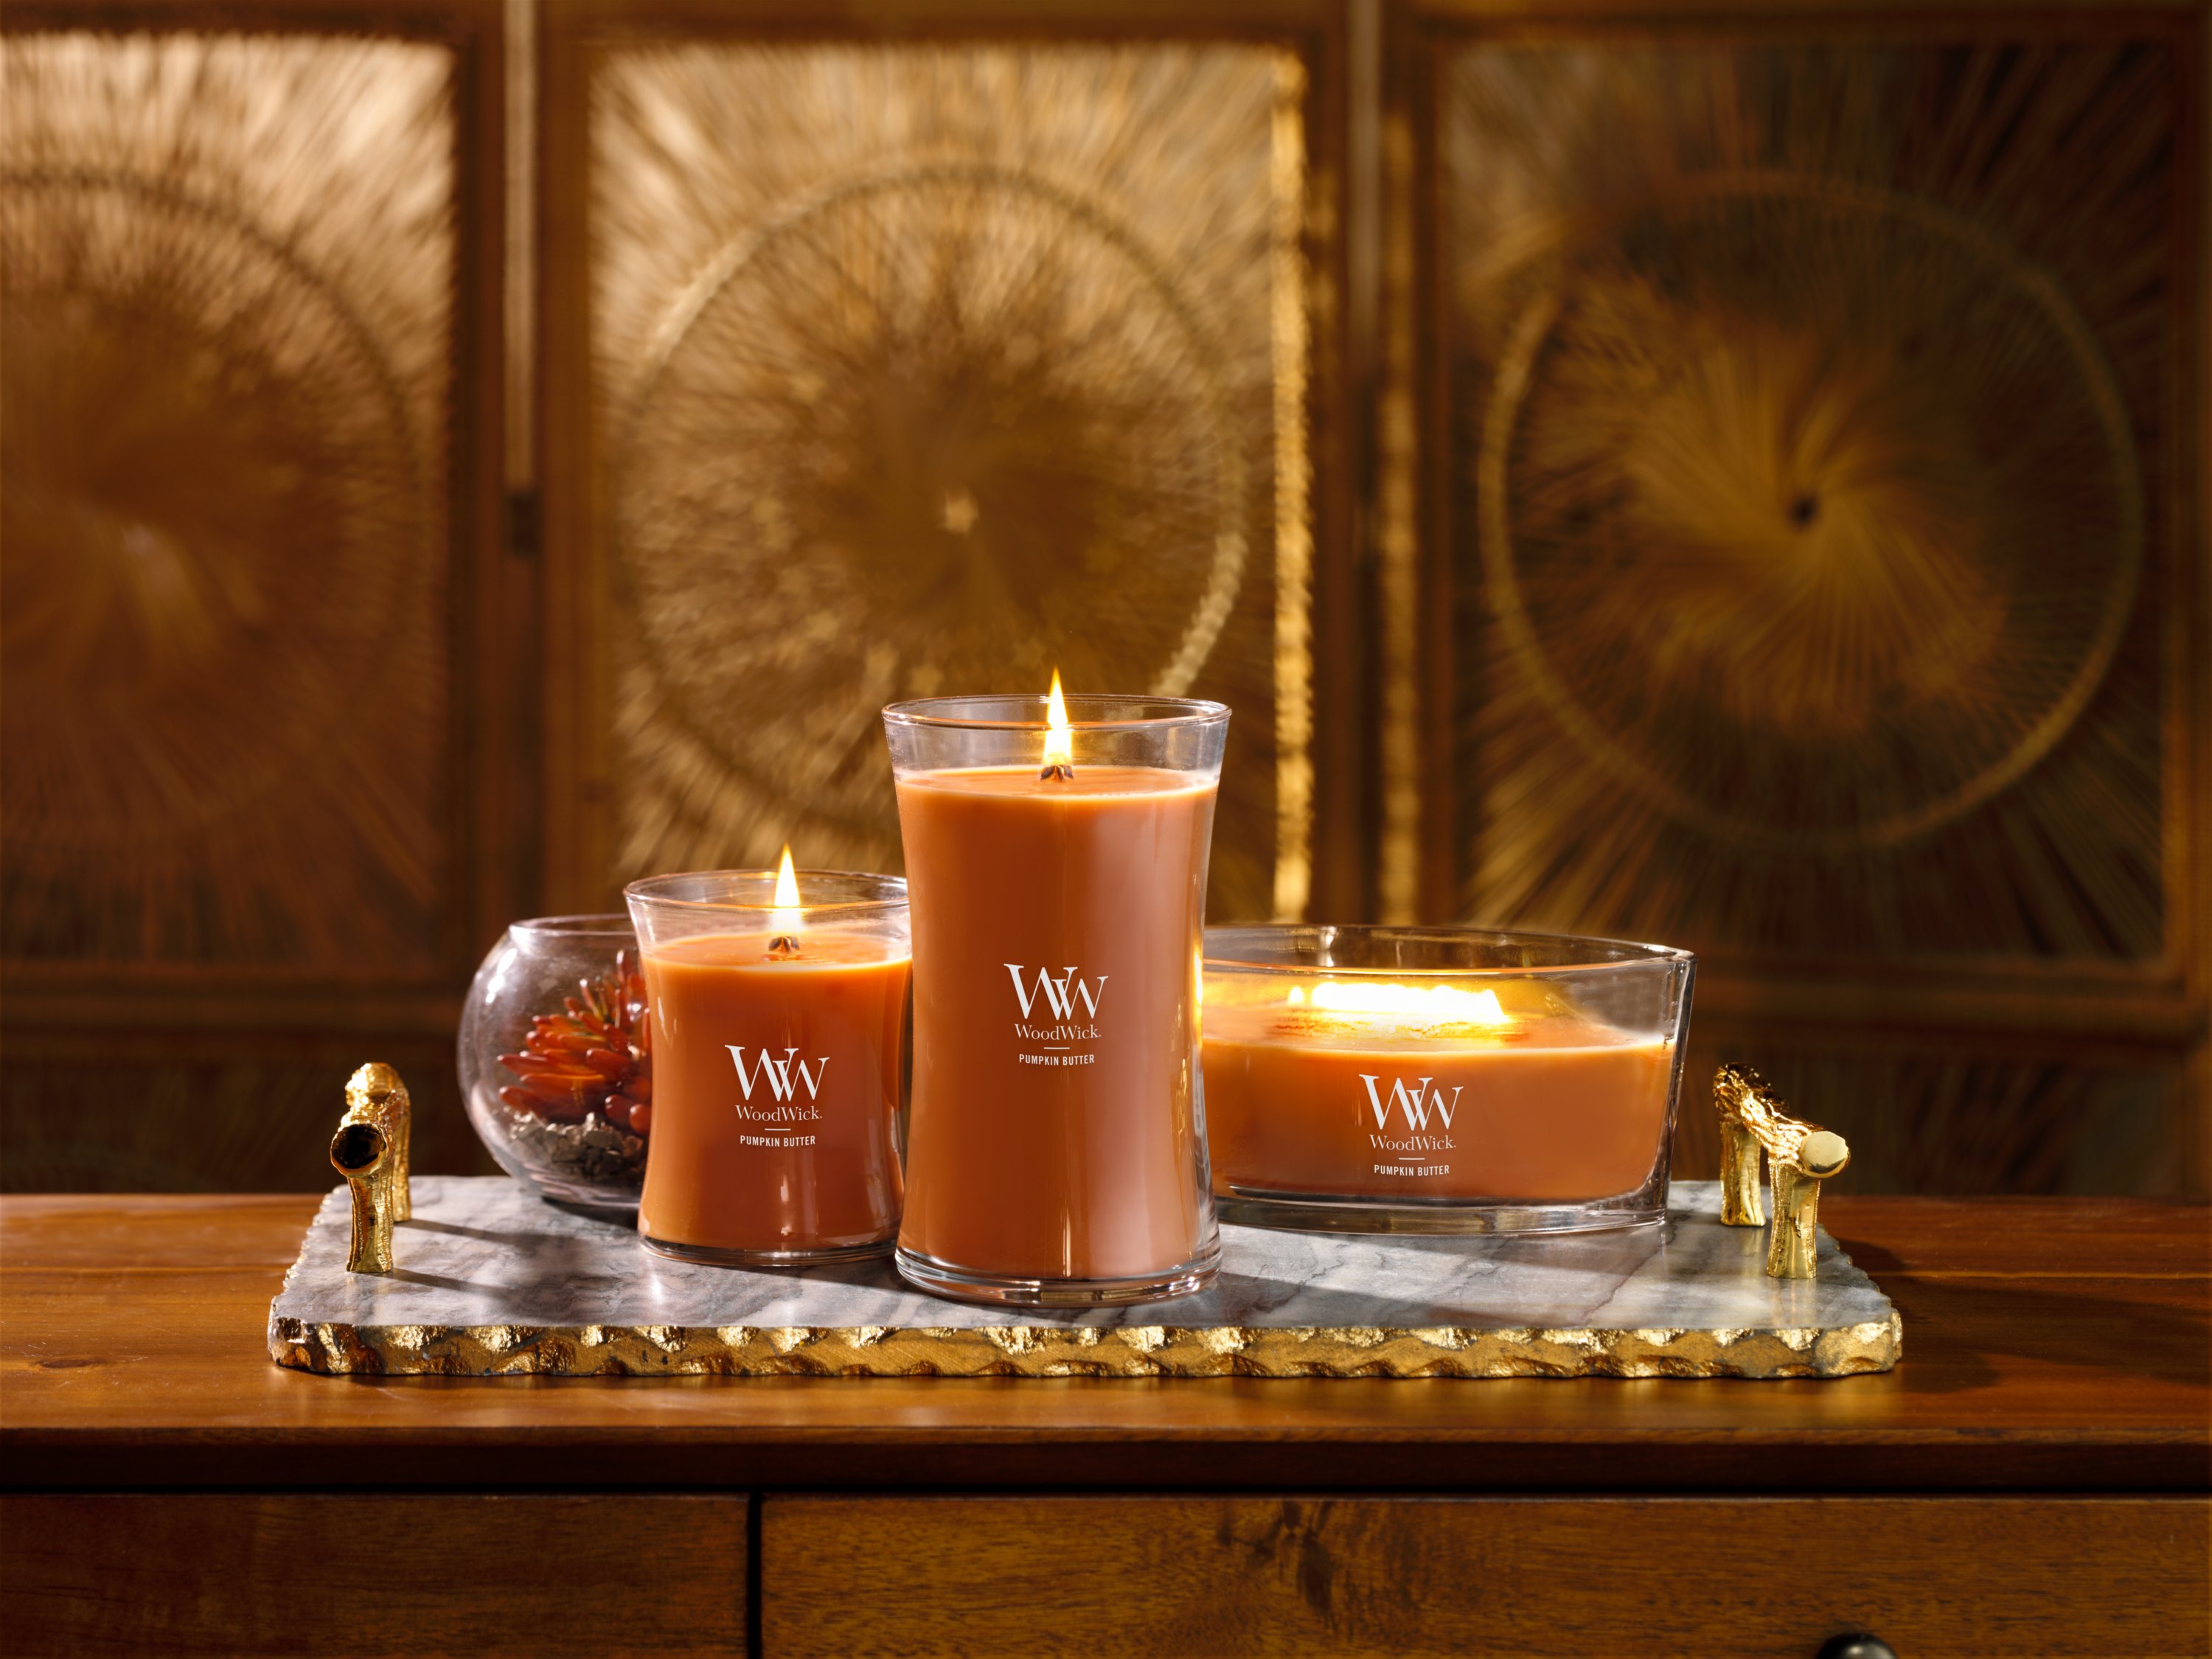 Pumpkin Butter WoodWick® Large Hourglass Candle - Large Hourglass